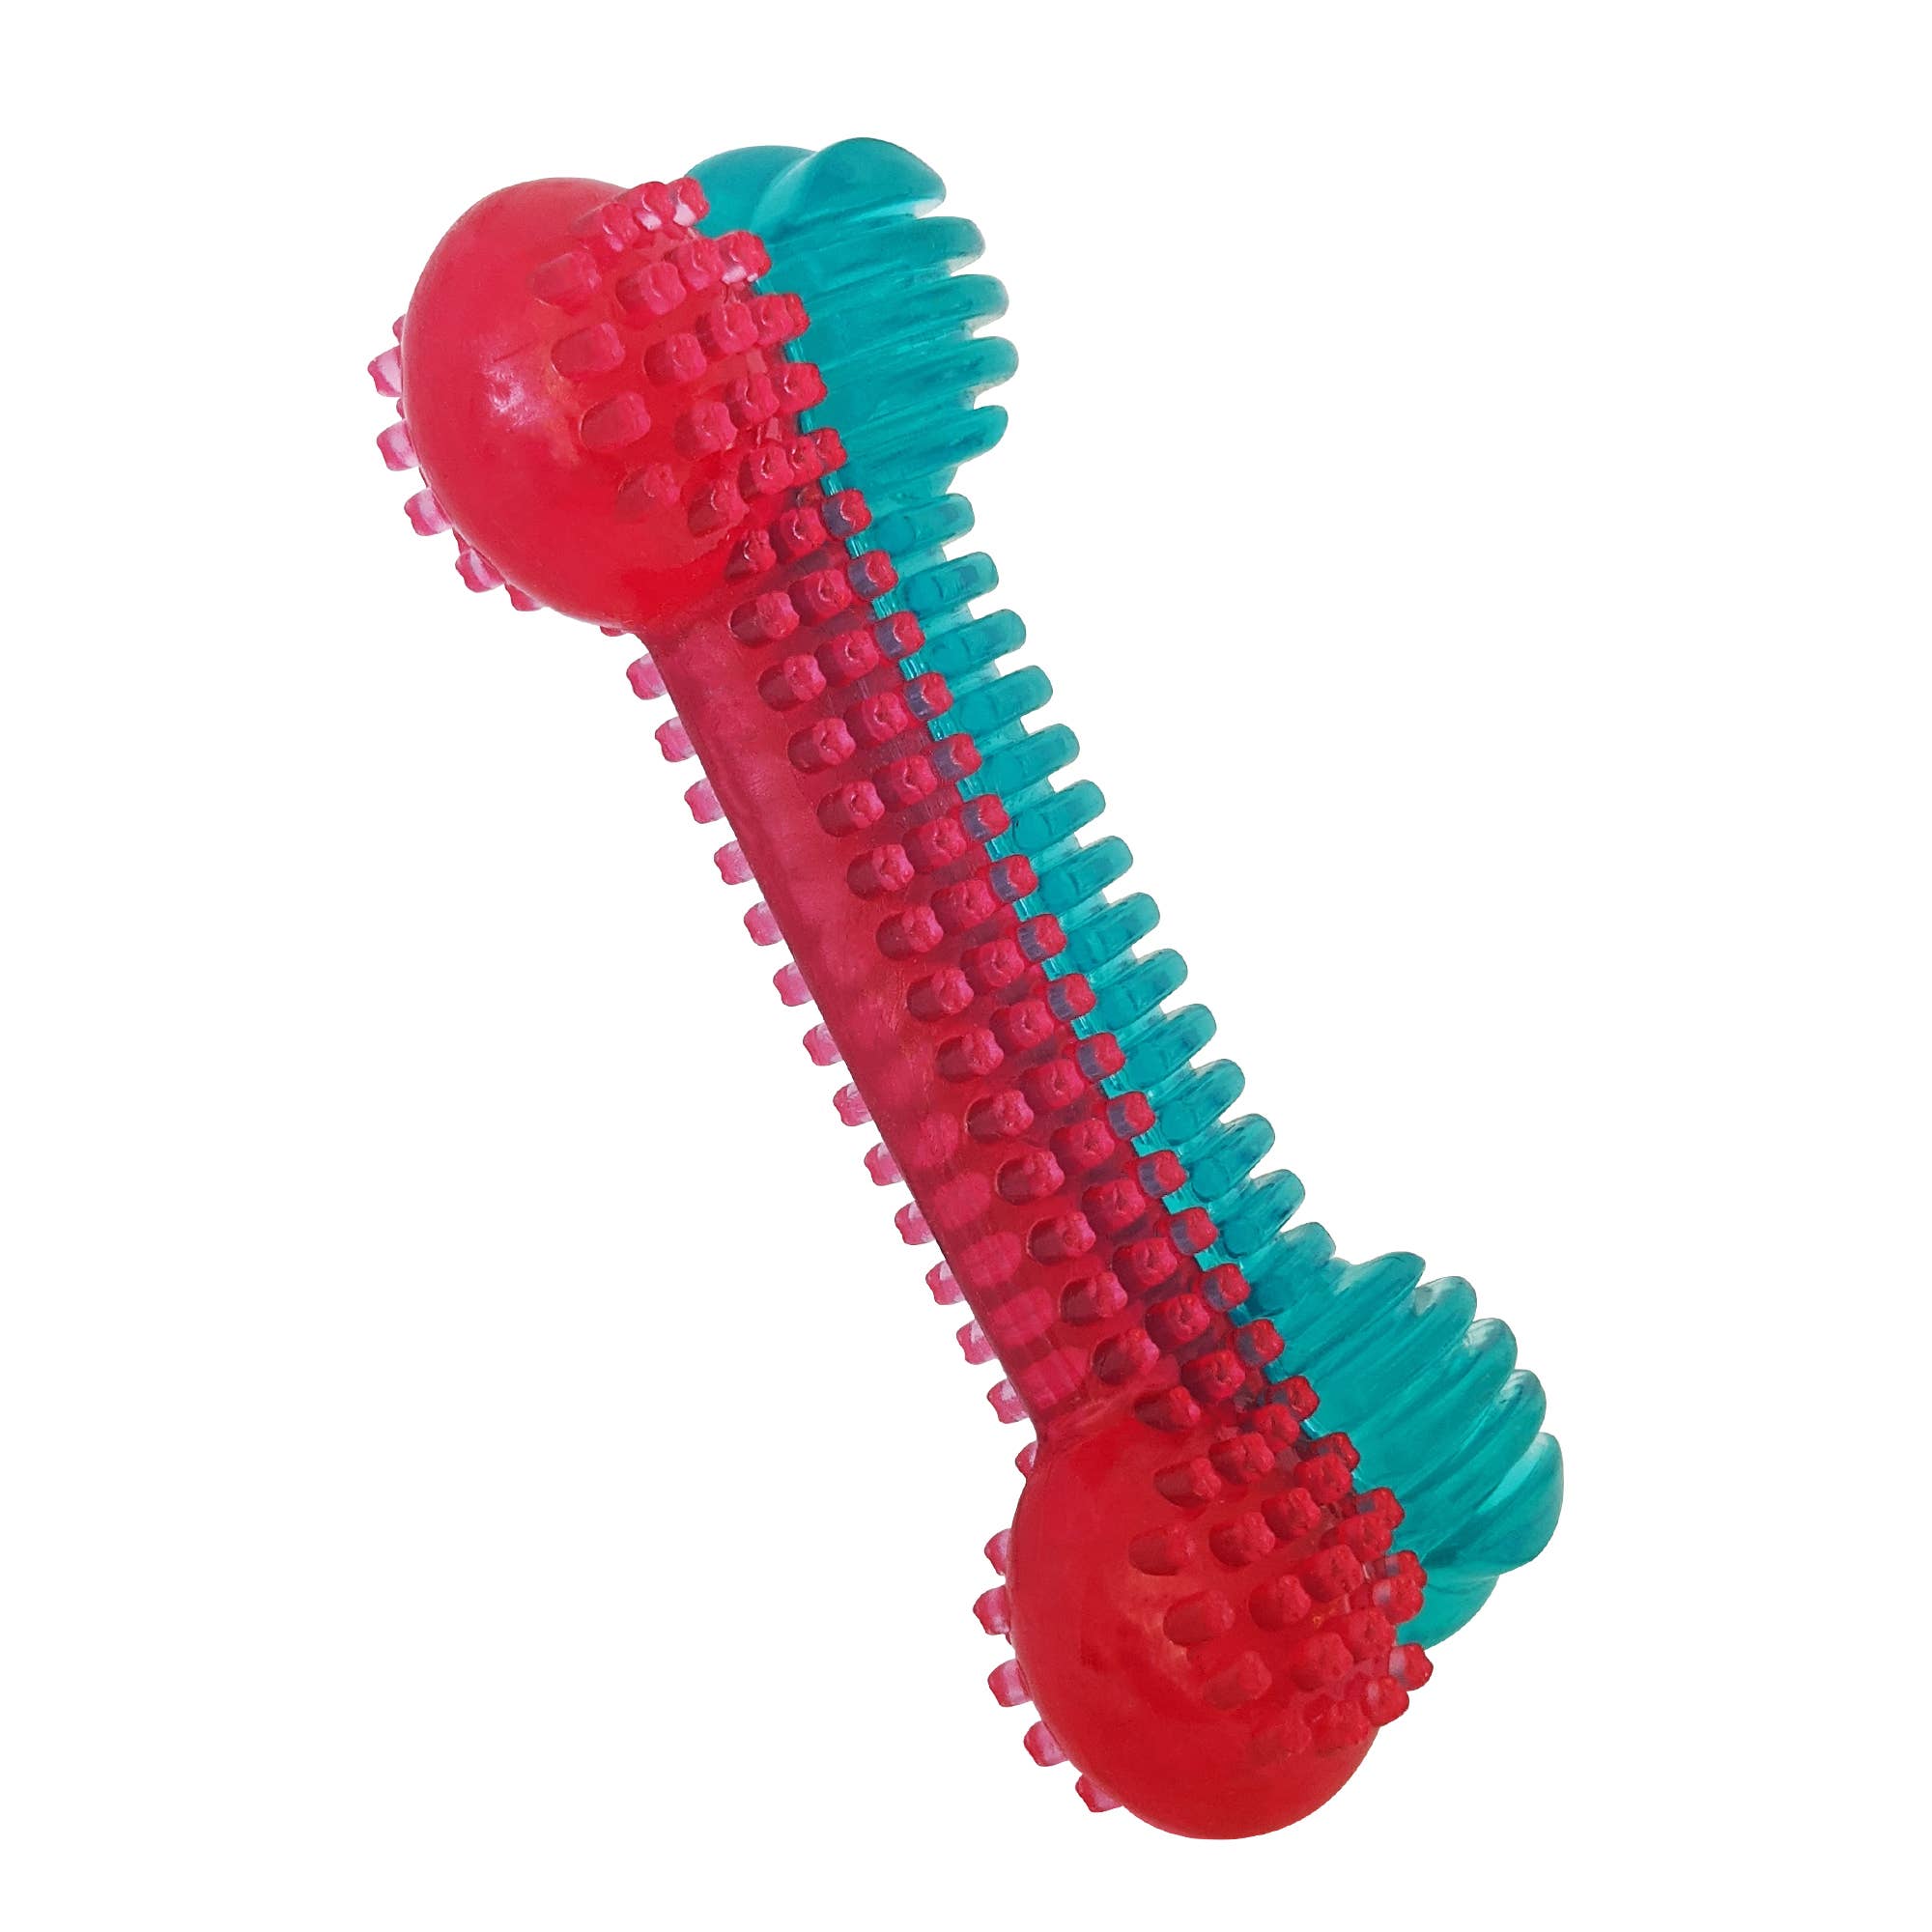 Textured Rubber Bone Dog Chew Toy - Dual Colored